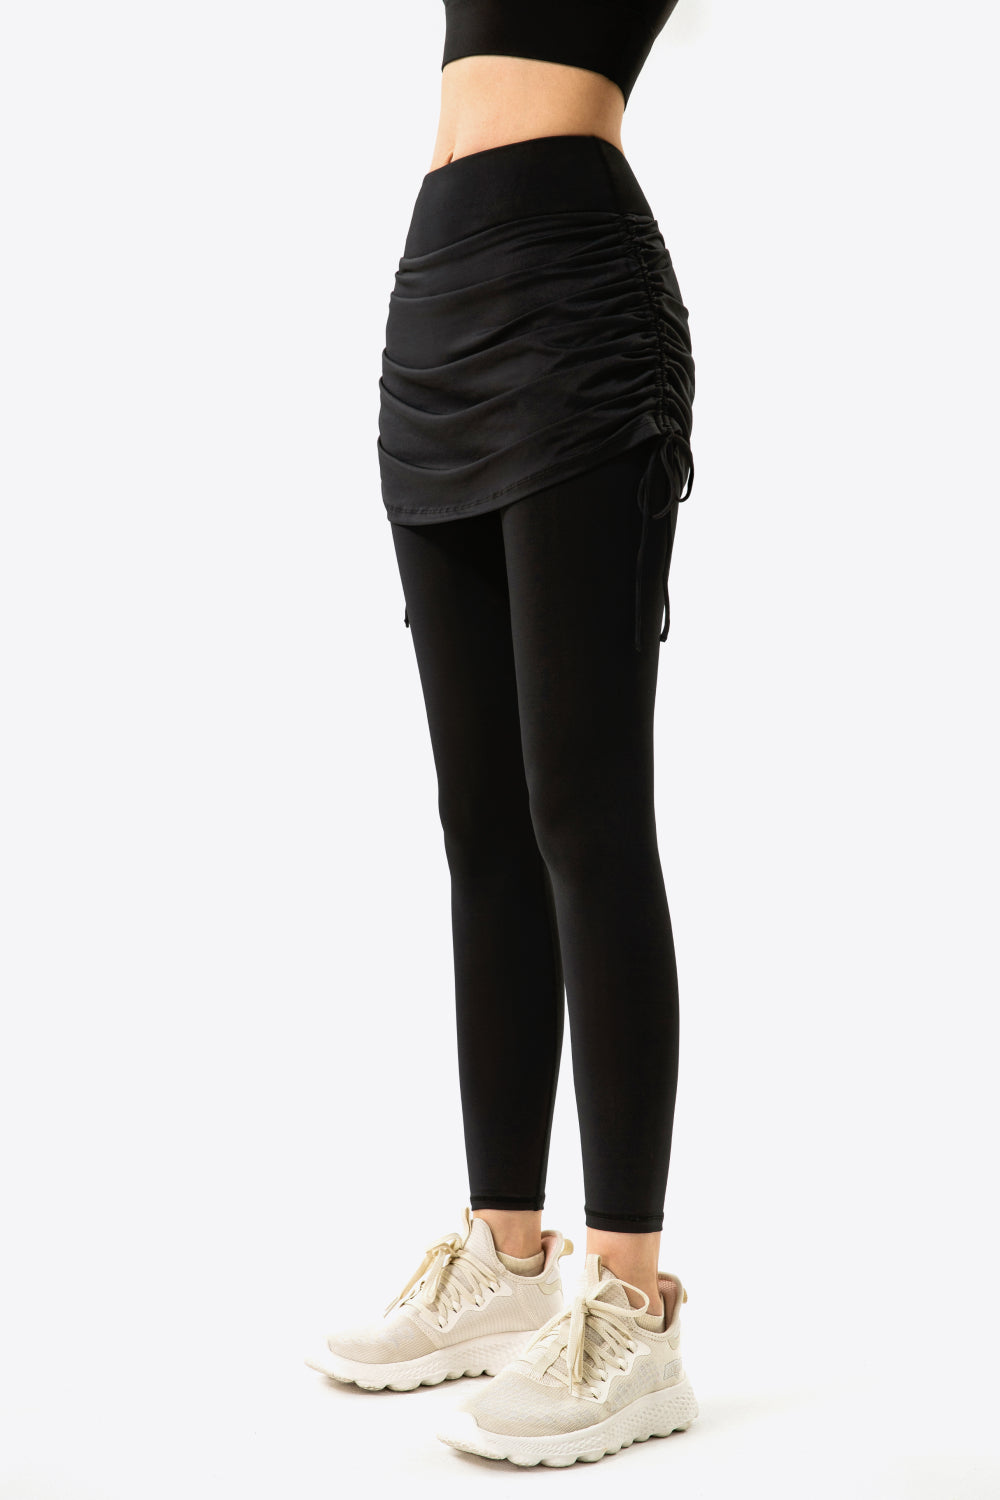 Buy Snug-Fit High Rise Active Skirt with Attached Tights in Black Online  India, Best Prices, COD - Clovia - AB0117P13